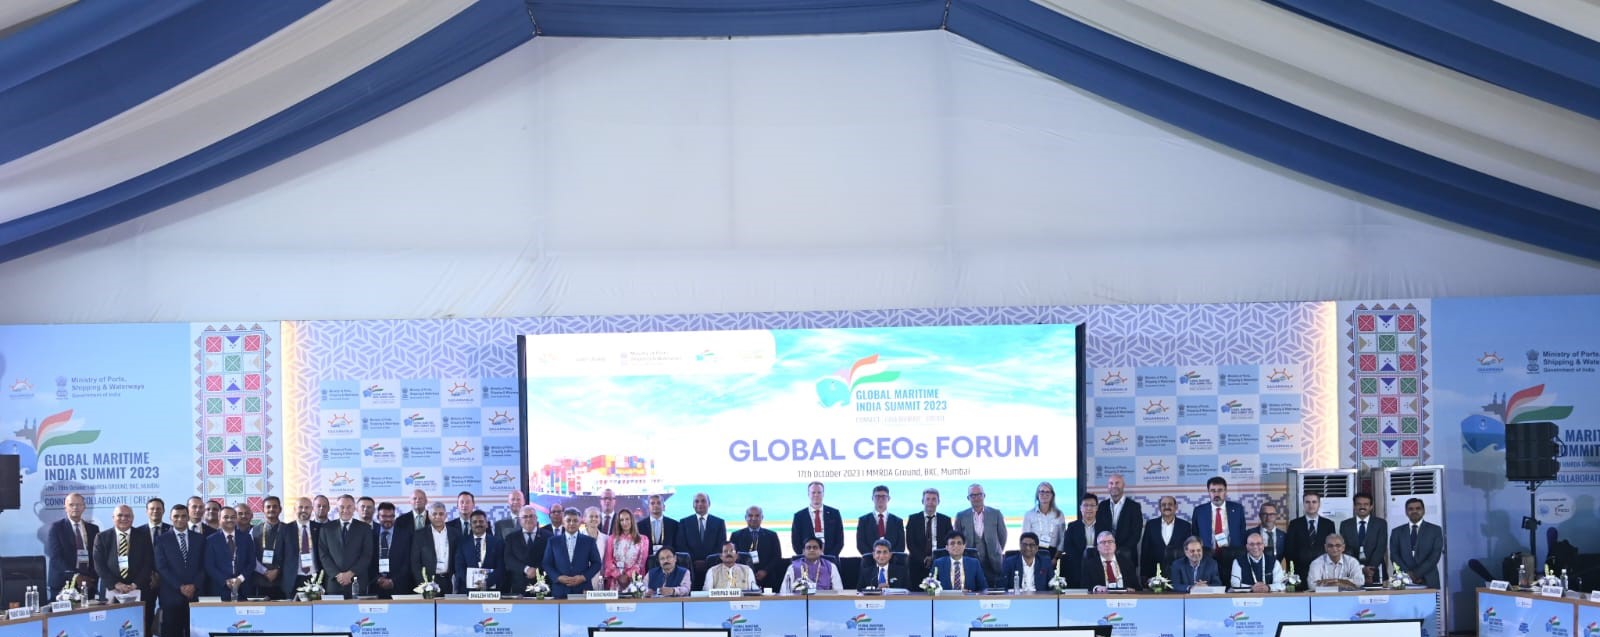 cmd, GRSE at the Global CEOs Forum during the 3rd edition of Global Maritime India Summit 2023, Mumbai on 17 Oct 23 - Thumbnail